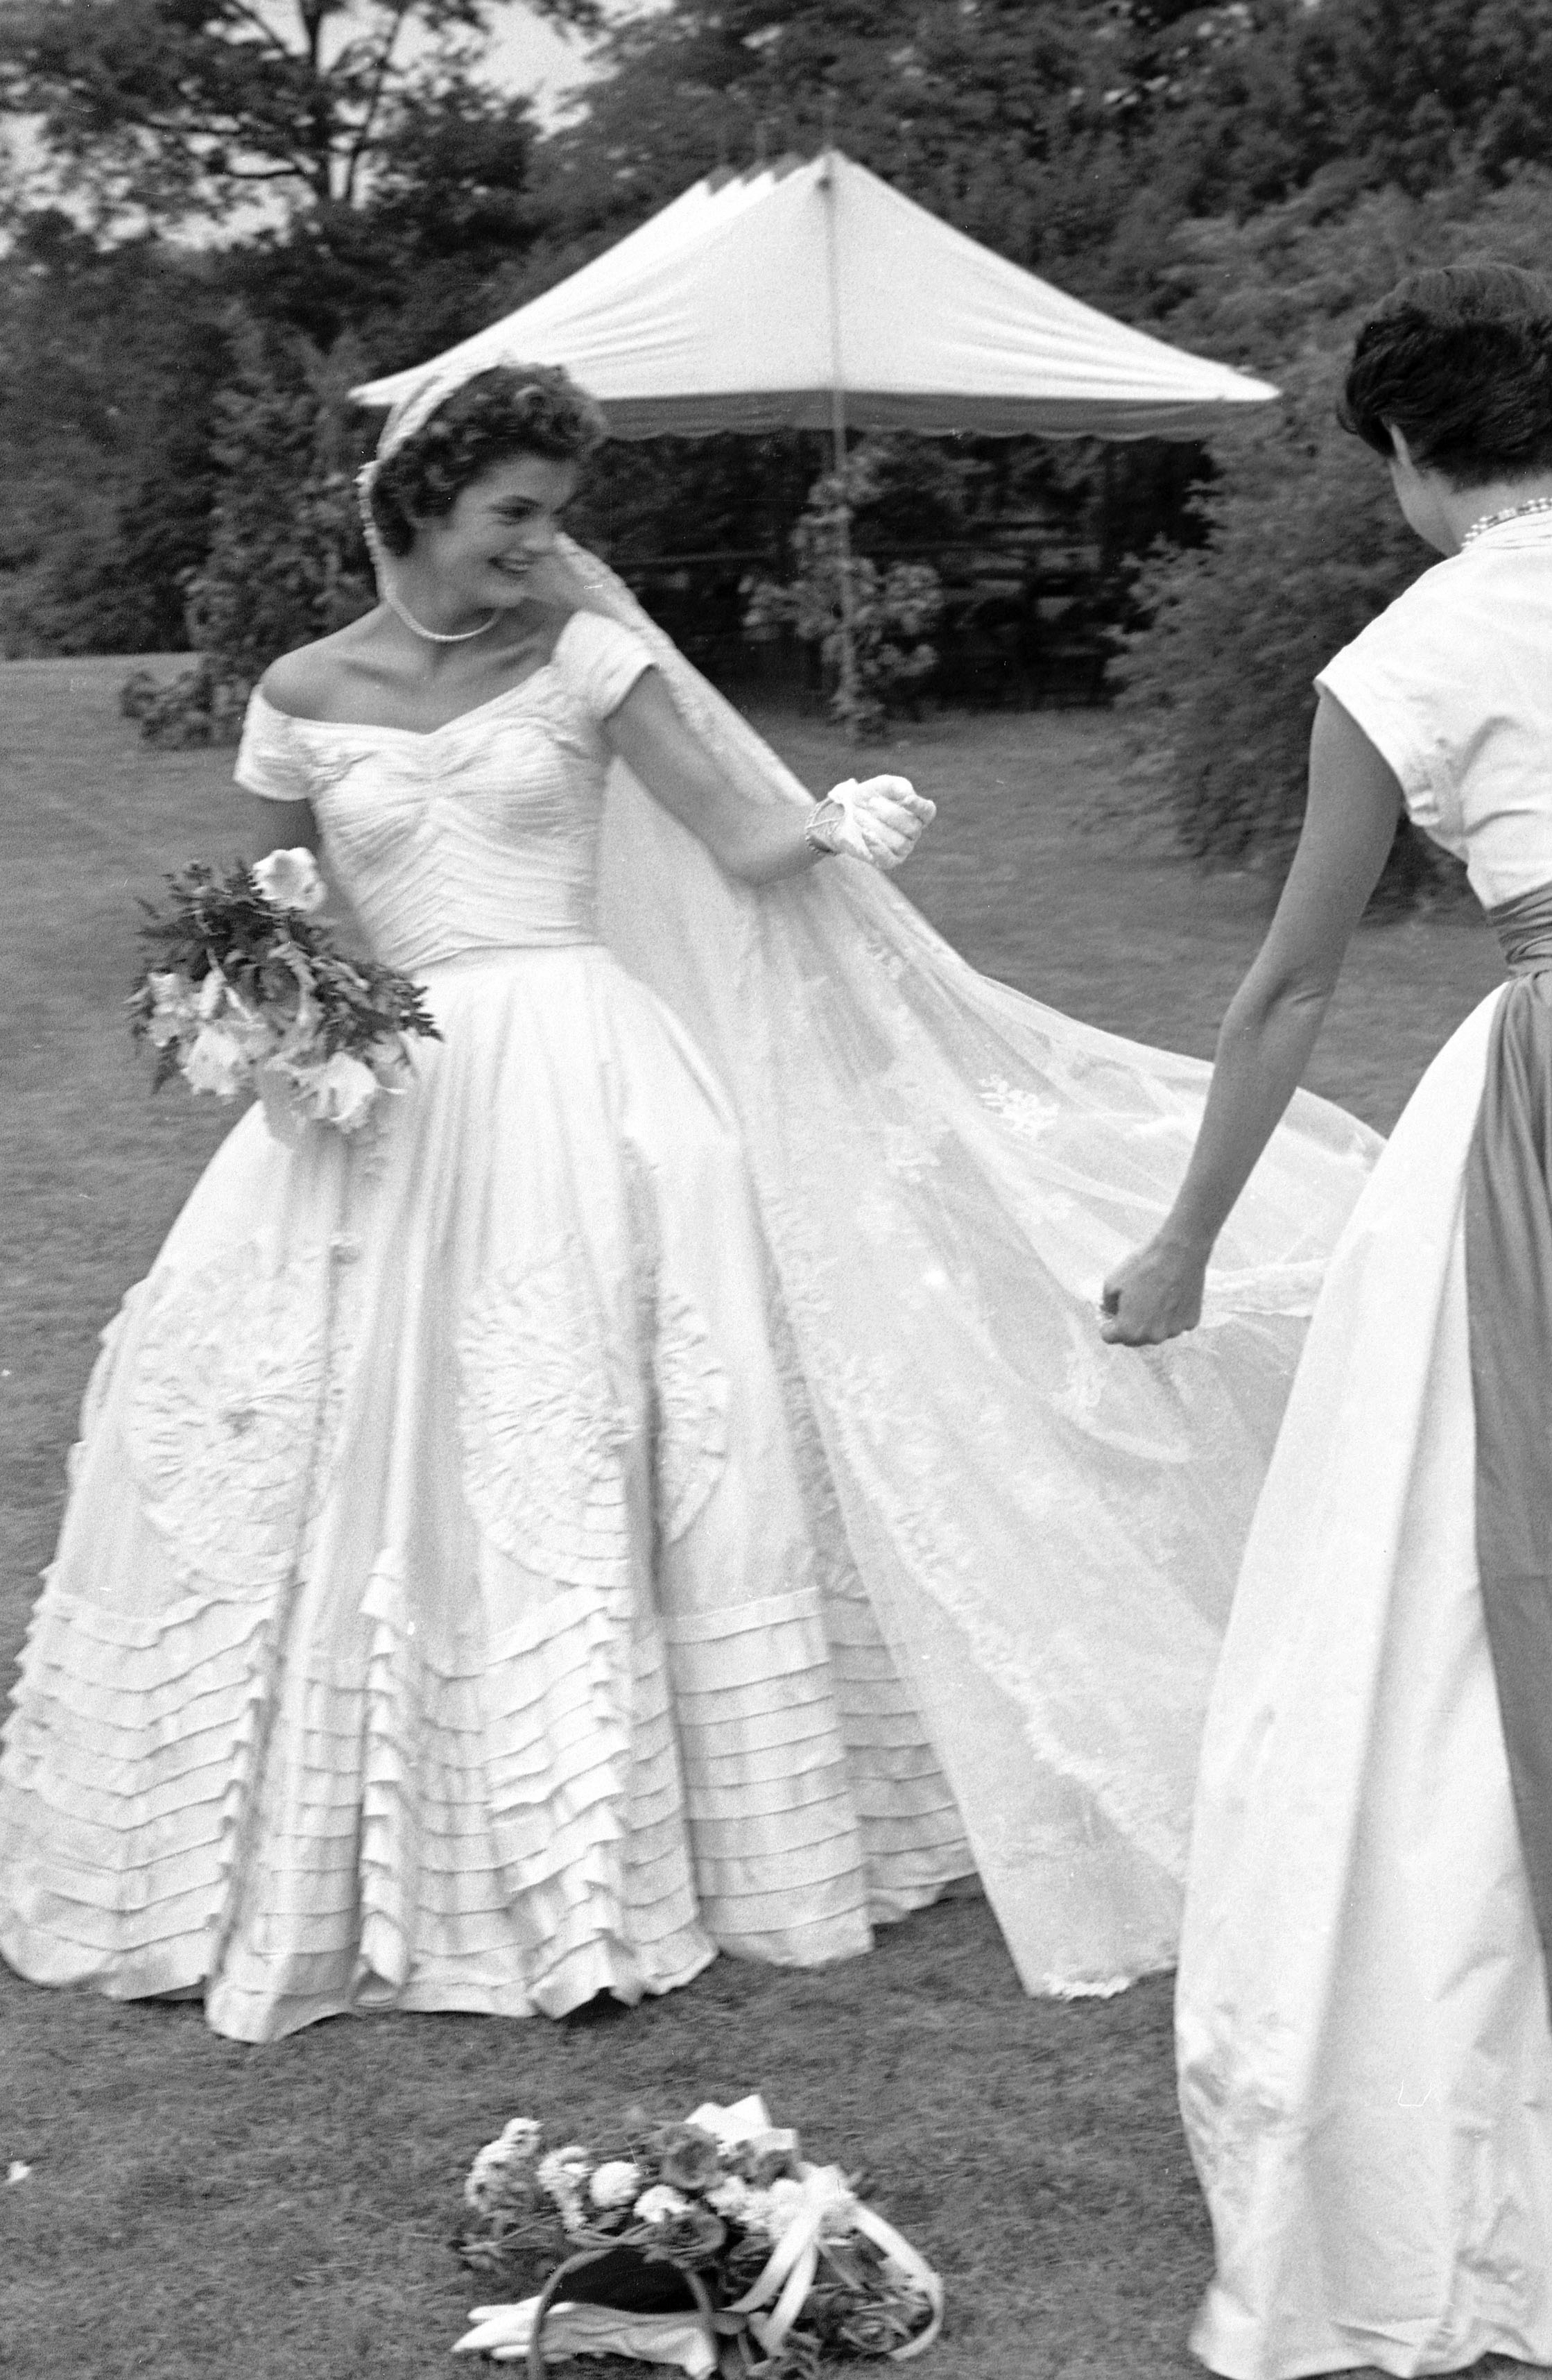 Jacqueline Bouvier fixing veil of wedding dress outdoors at Hammersmith Farm on day of her marriage to Senator John F. Kennedy, September 12, 1953.